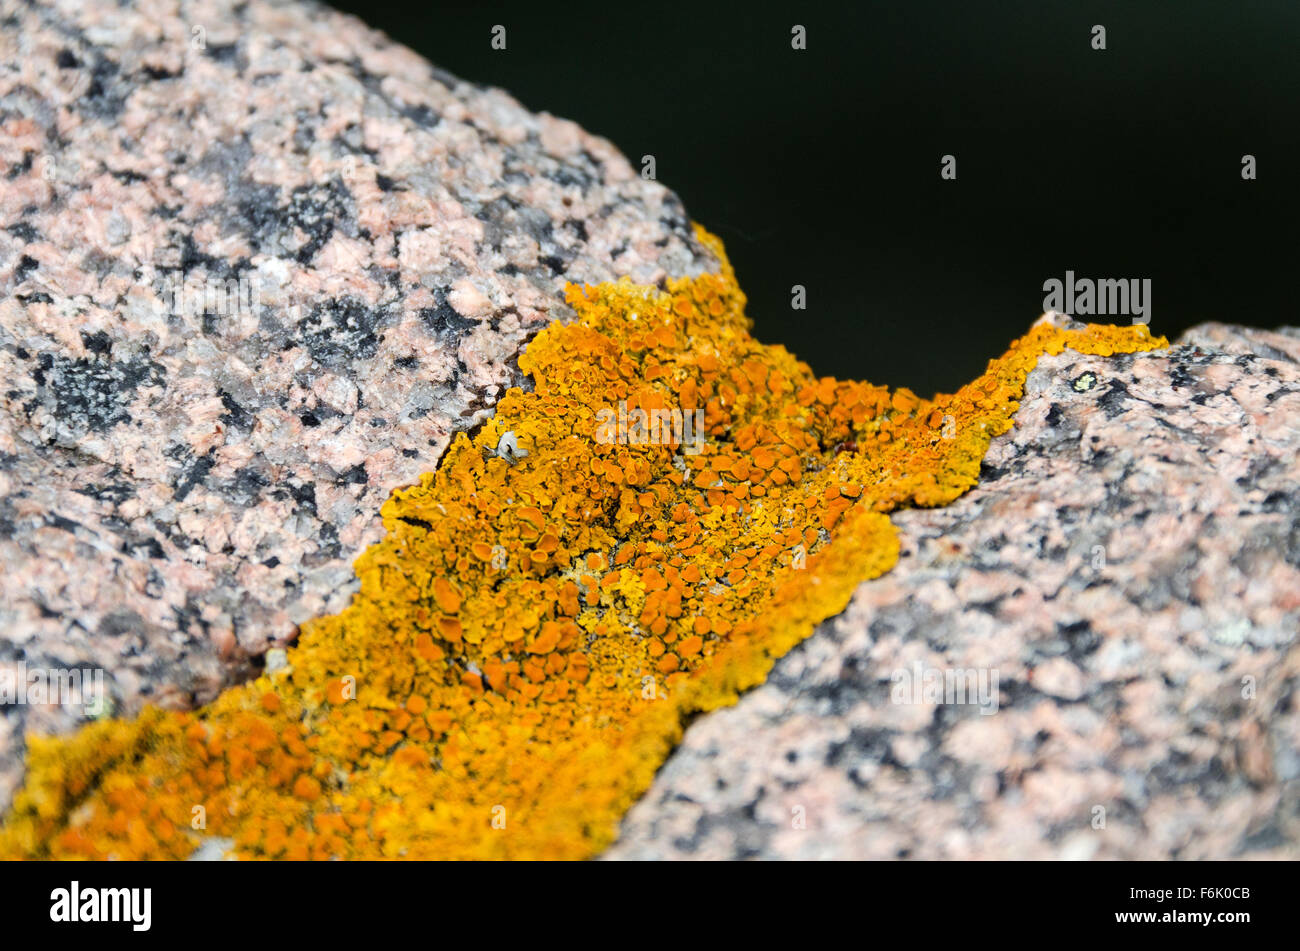 Xanthoria parietina lichen growing on a granite coping stone on the Otter Cove Causeway, Acadia National Park, Maine. Stock Photo